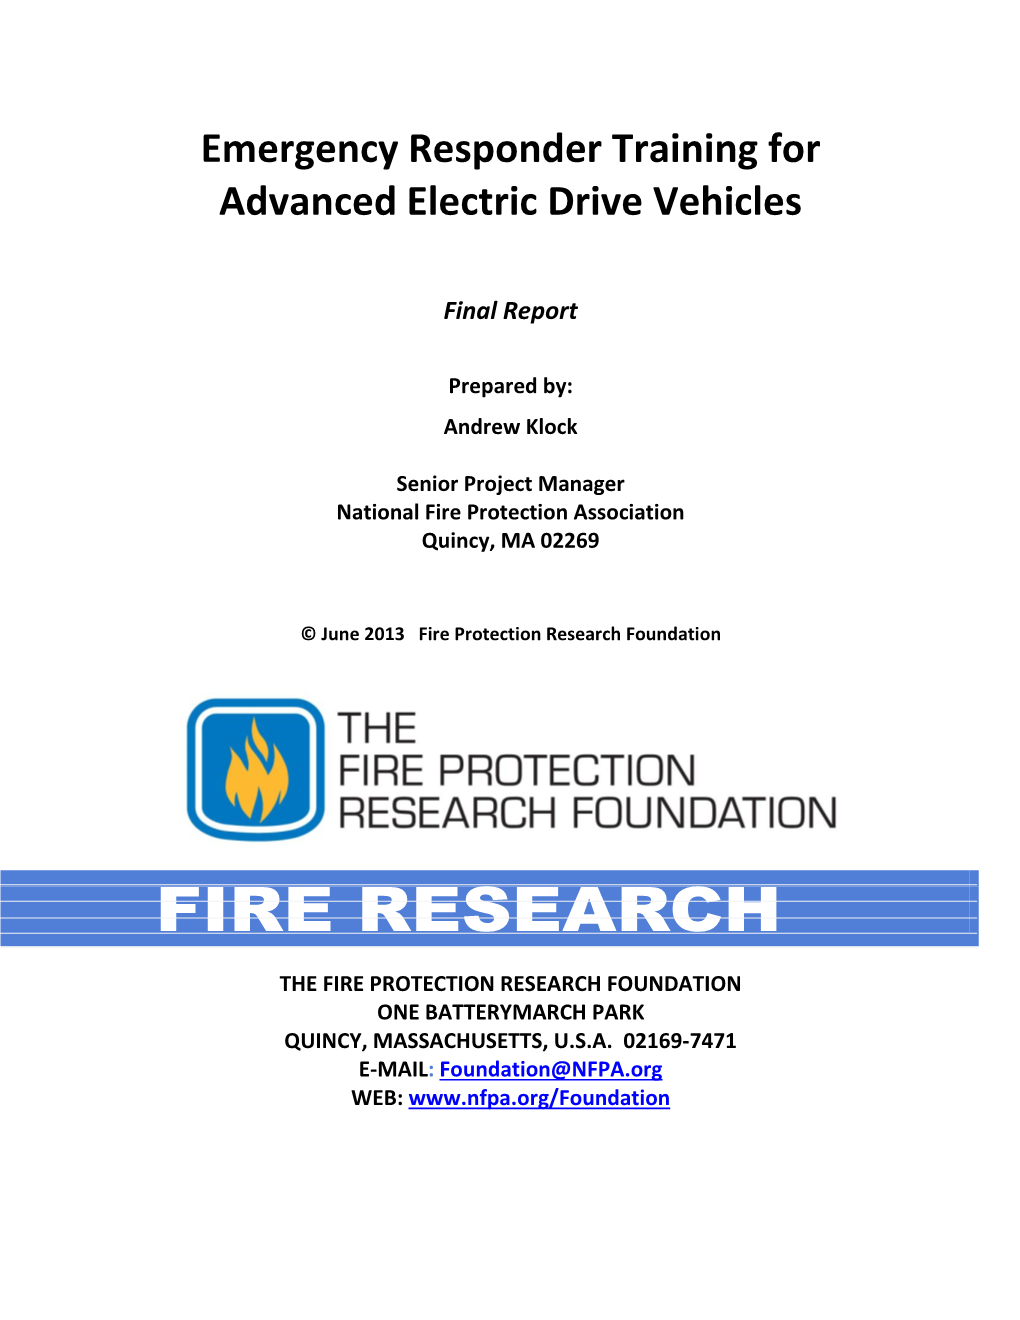 Emergency Responder Training for Advanced Electric Drive Vehicles